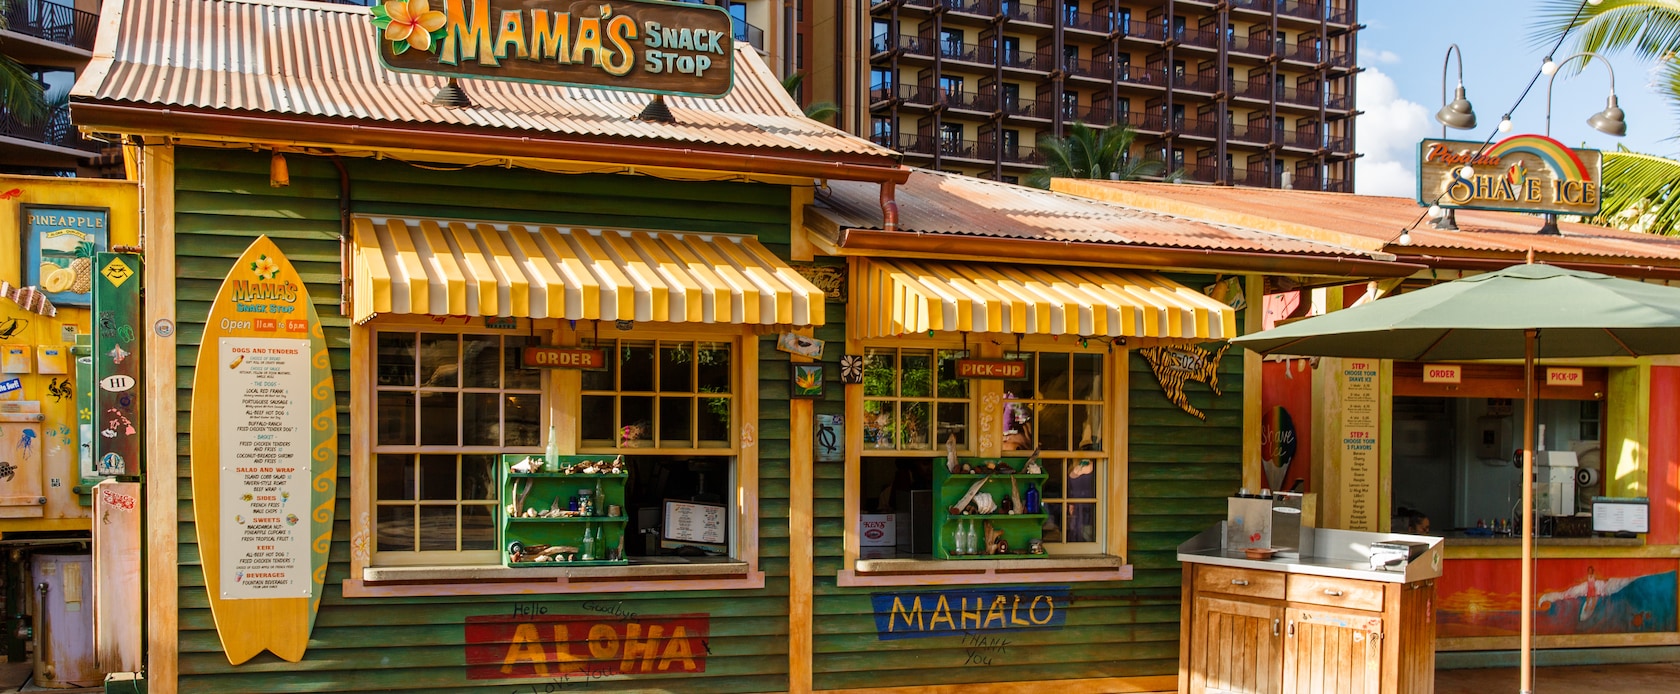 The exterior of Mama's Snack Stop, a quick-service venue with weathered green paint and yellow-striped awnings